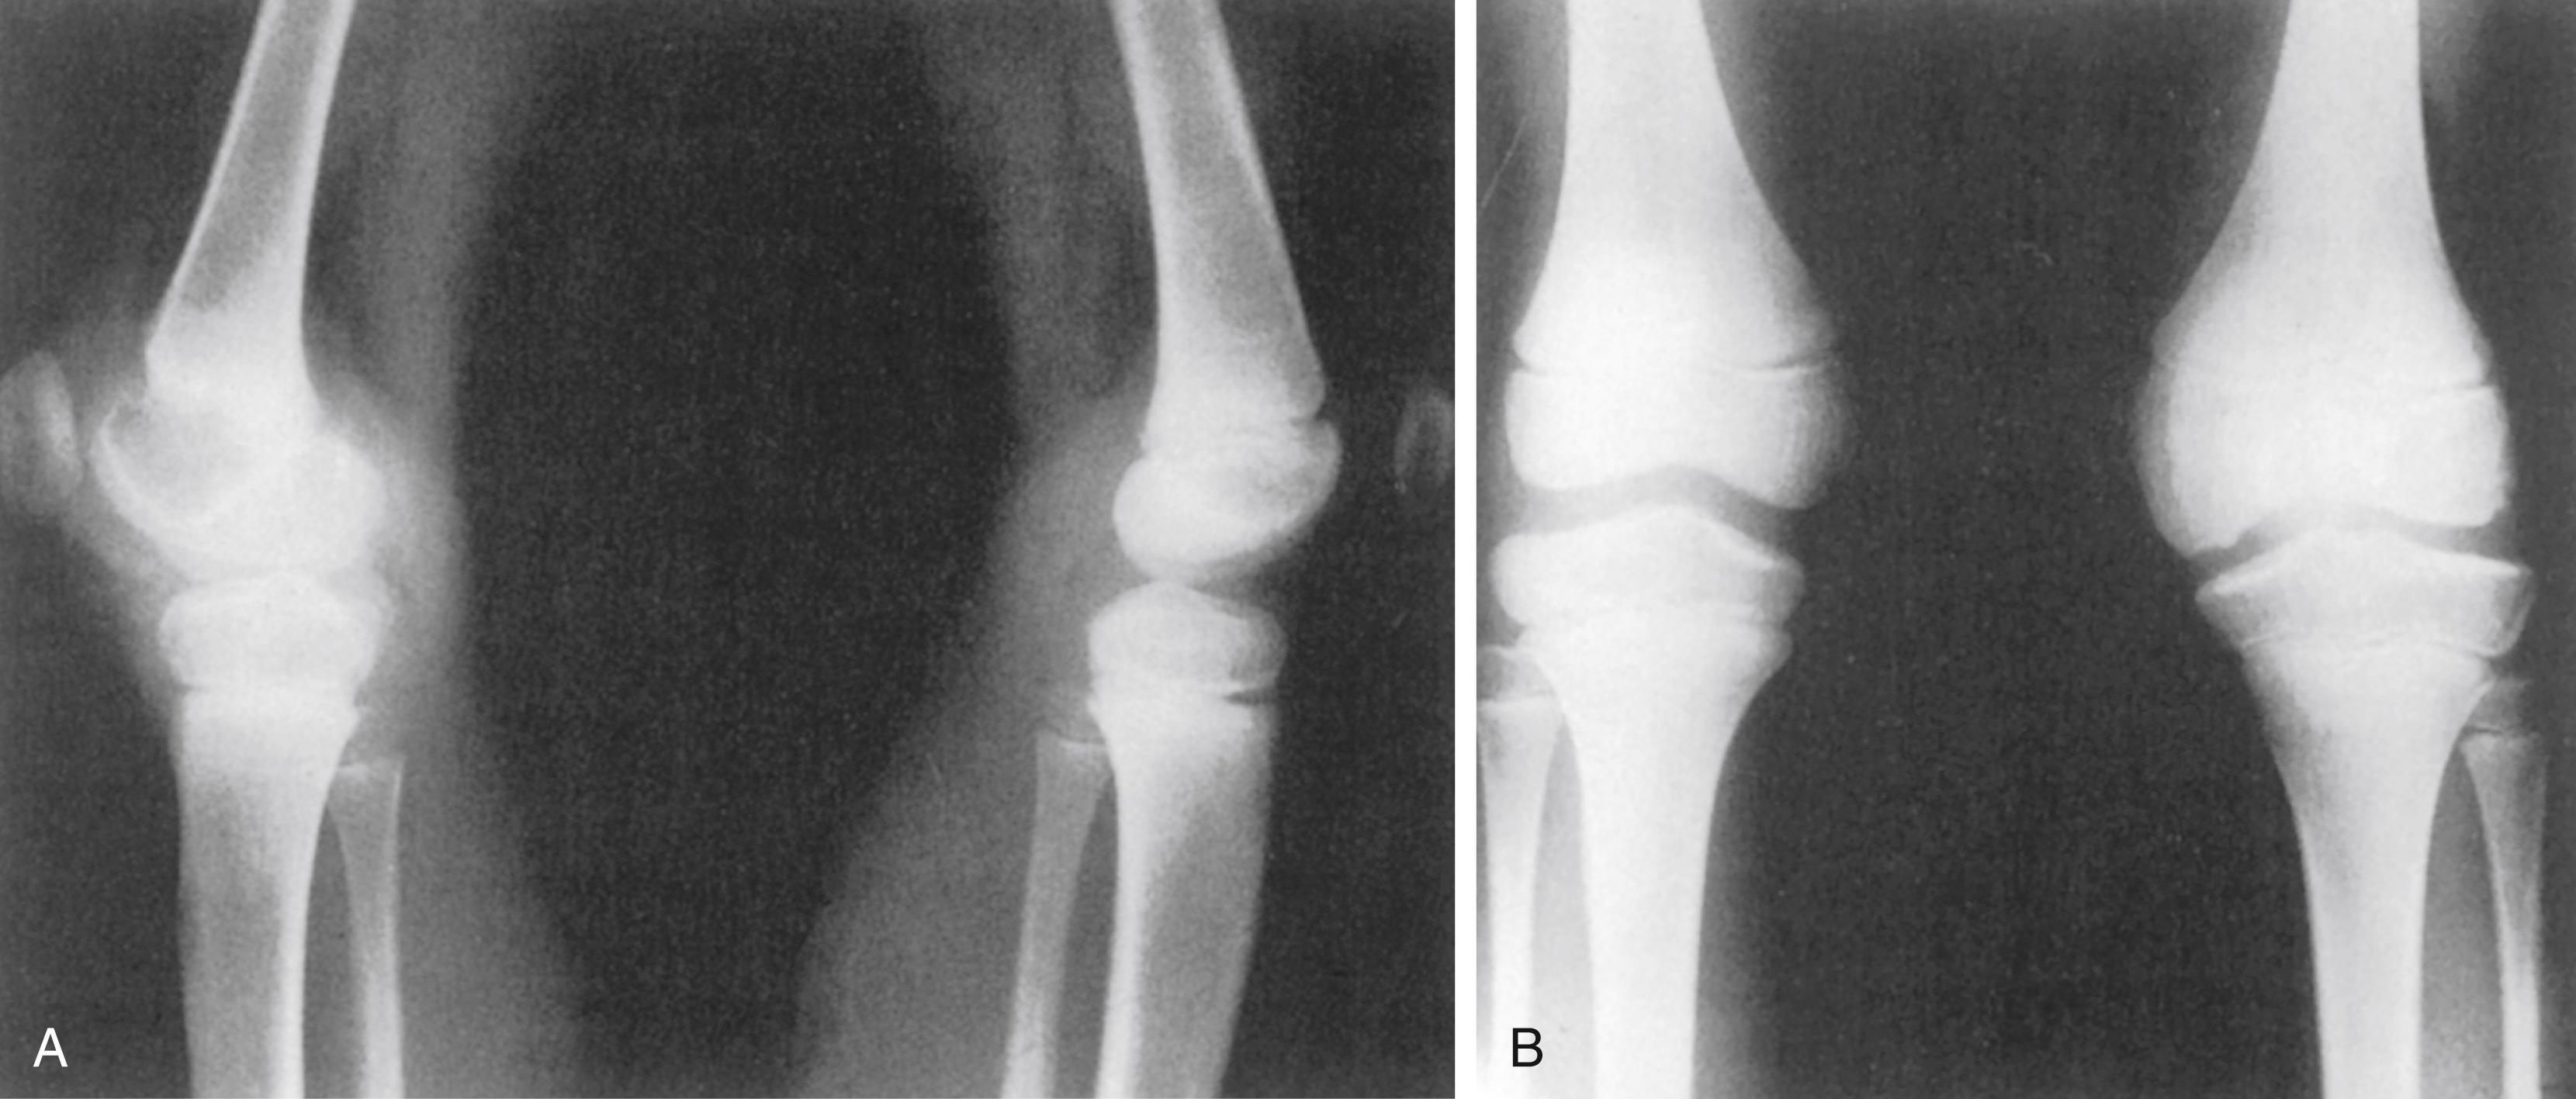 FIG. 39.1, (A) Hemophilic arthropathy of the left knee. (B) The right knee is provided for comparison. Radiographs show the chronic synovitis and enlargement of the distal femoral epiphysis.